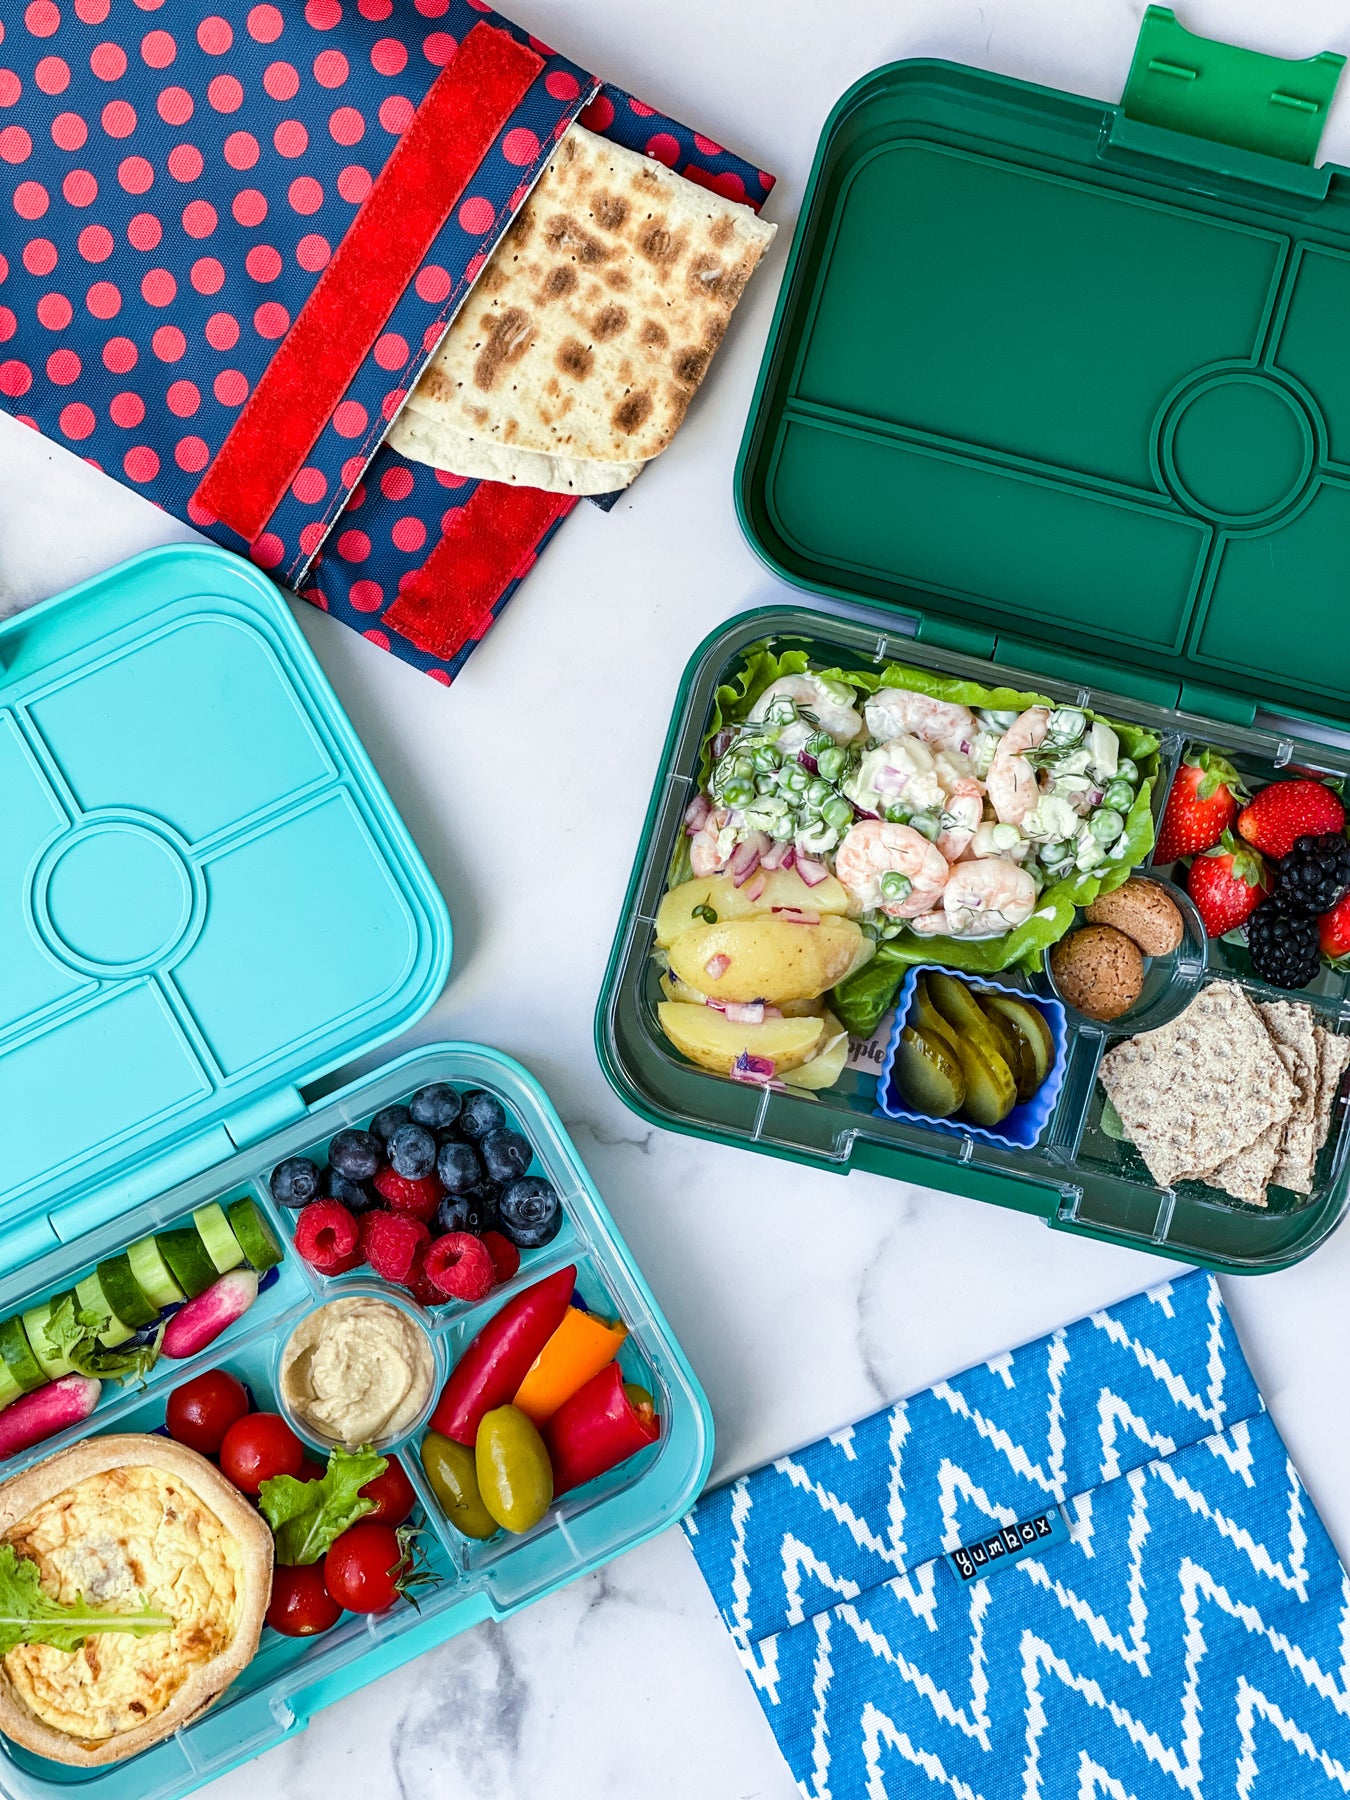 Yumbox - Lunches don't get easier than this! Yumbox Tapas & Yumbox